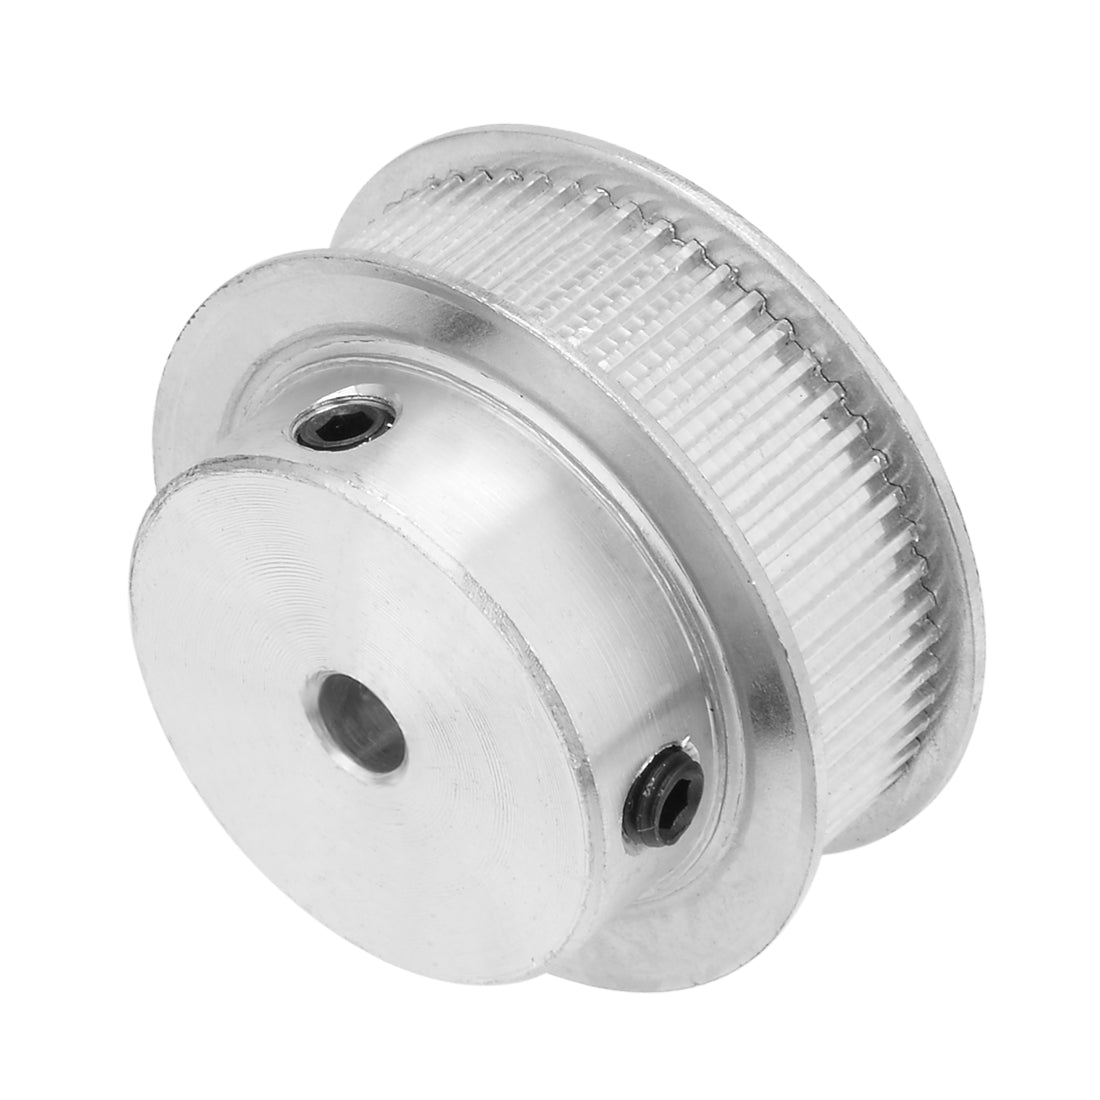 uxcell Uxcell Aluminum M-X-L 60 Teeth 6mm Bore Timing Belt Idler Pulley Synchronous Wheel 10mm Belt for 3D Printer CNC